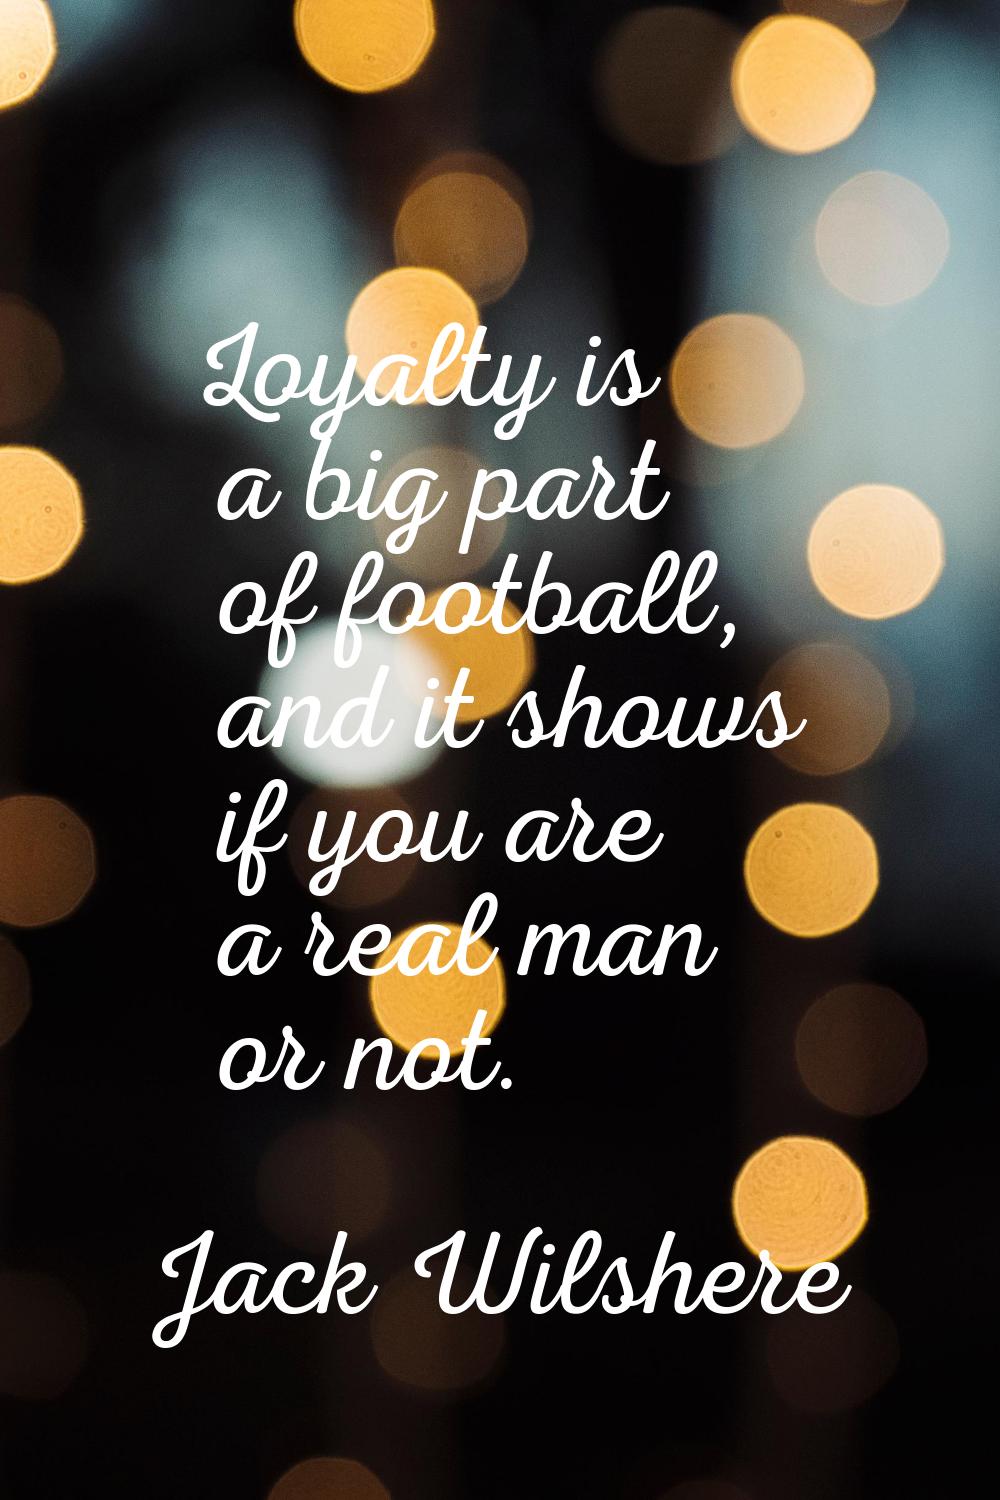 Loyalty is a big part of football, and it shows if you are a real man or not.